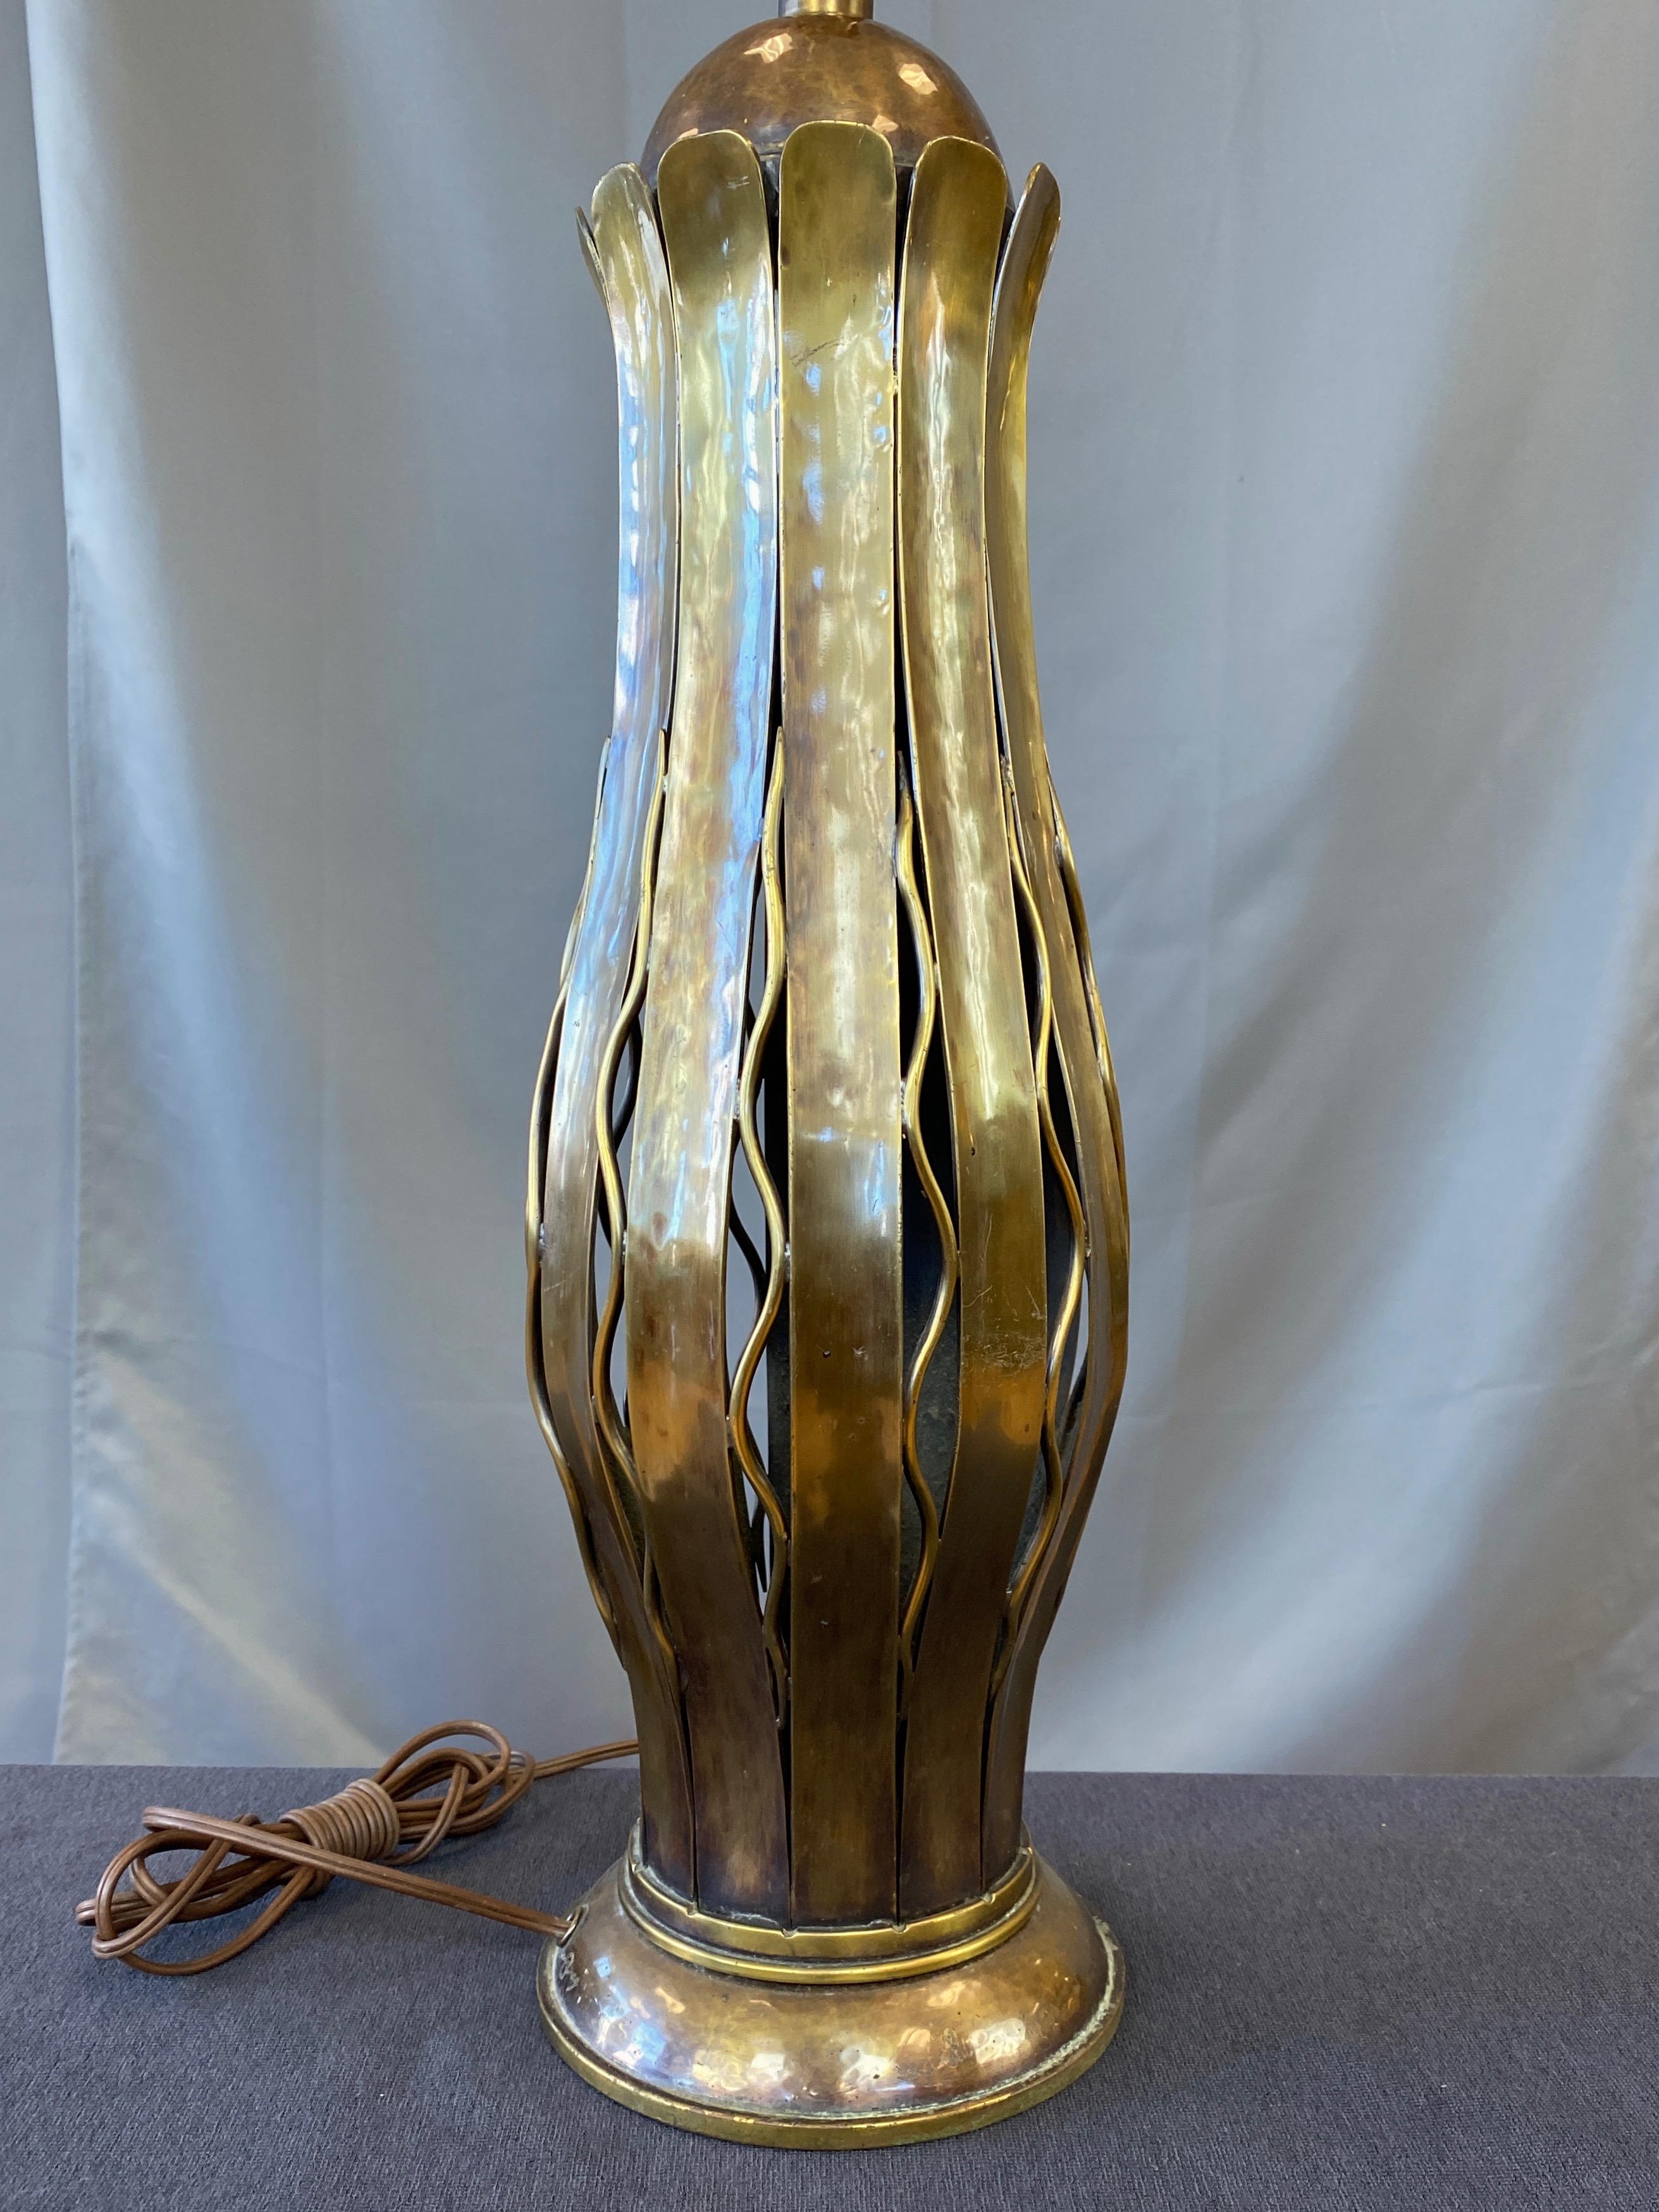 Hans Grag for Gump’s Hammered Copper and Brass Table Lamp, 1950s For Sale 4